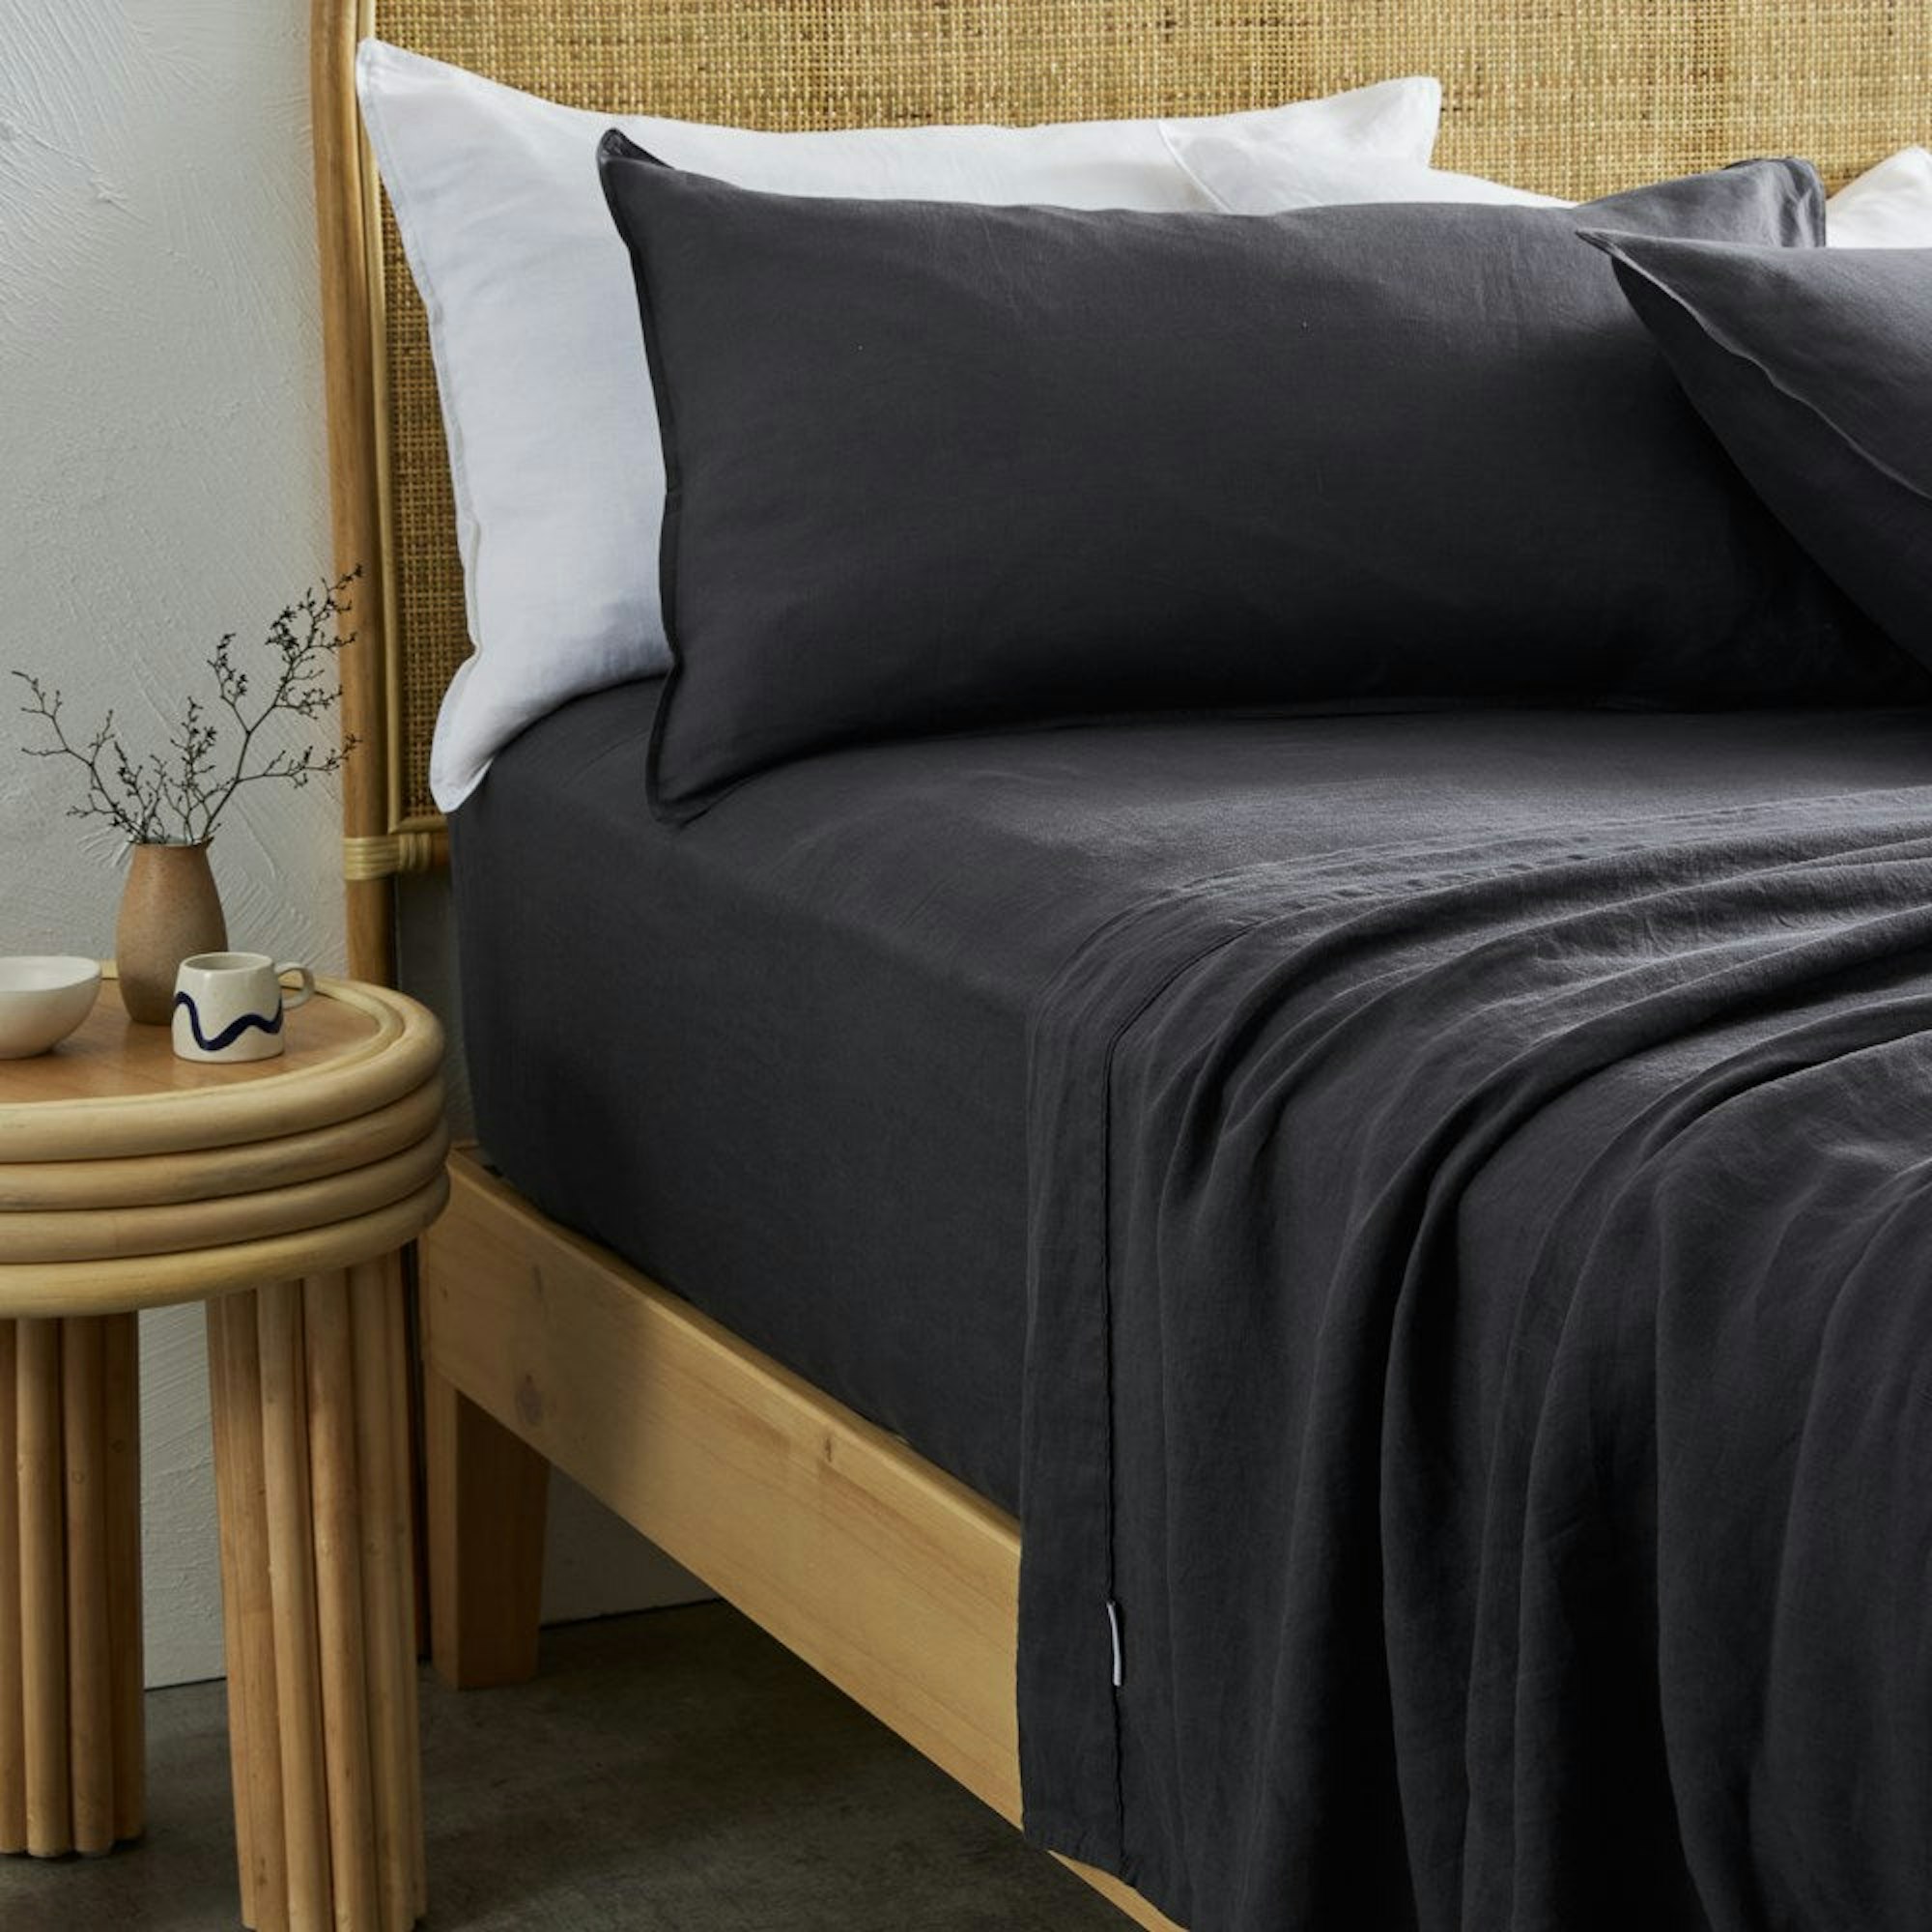 Complete bed setting with charcoal linen sheets and a side table